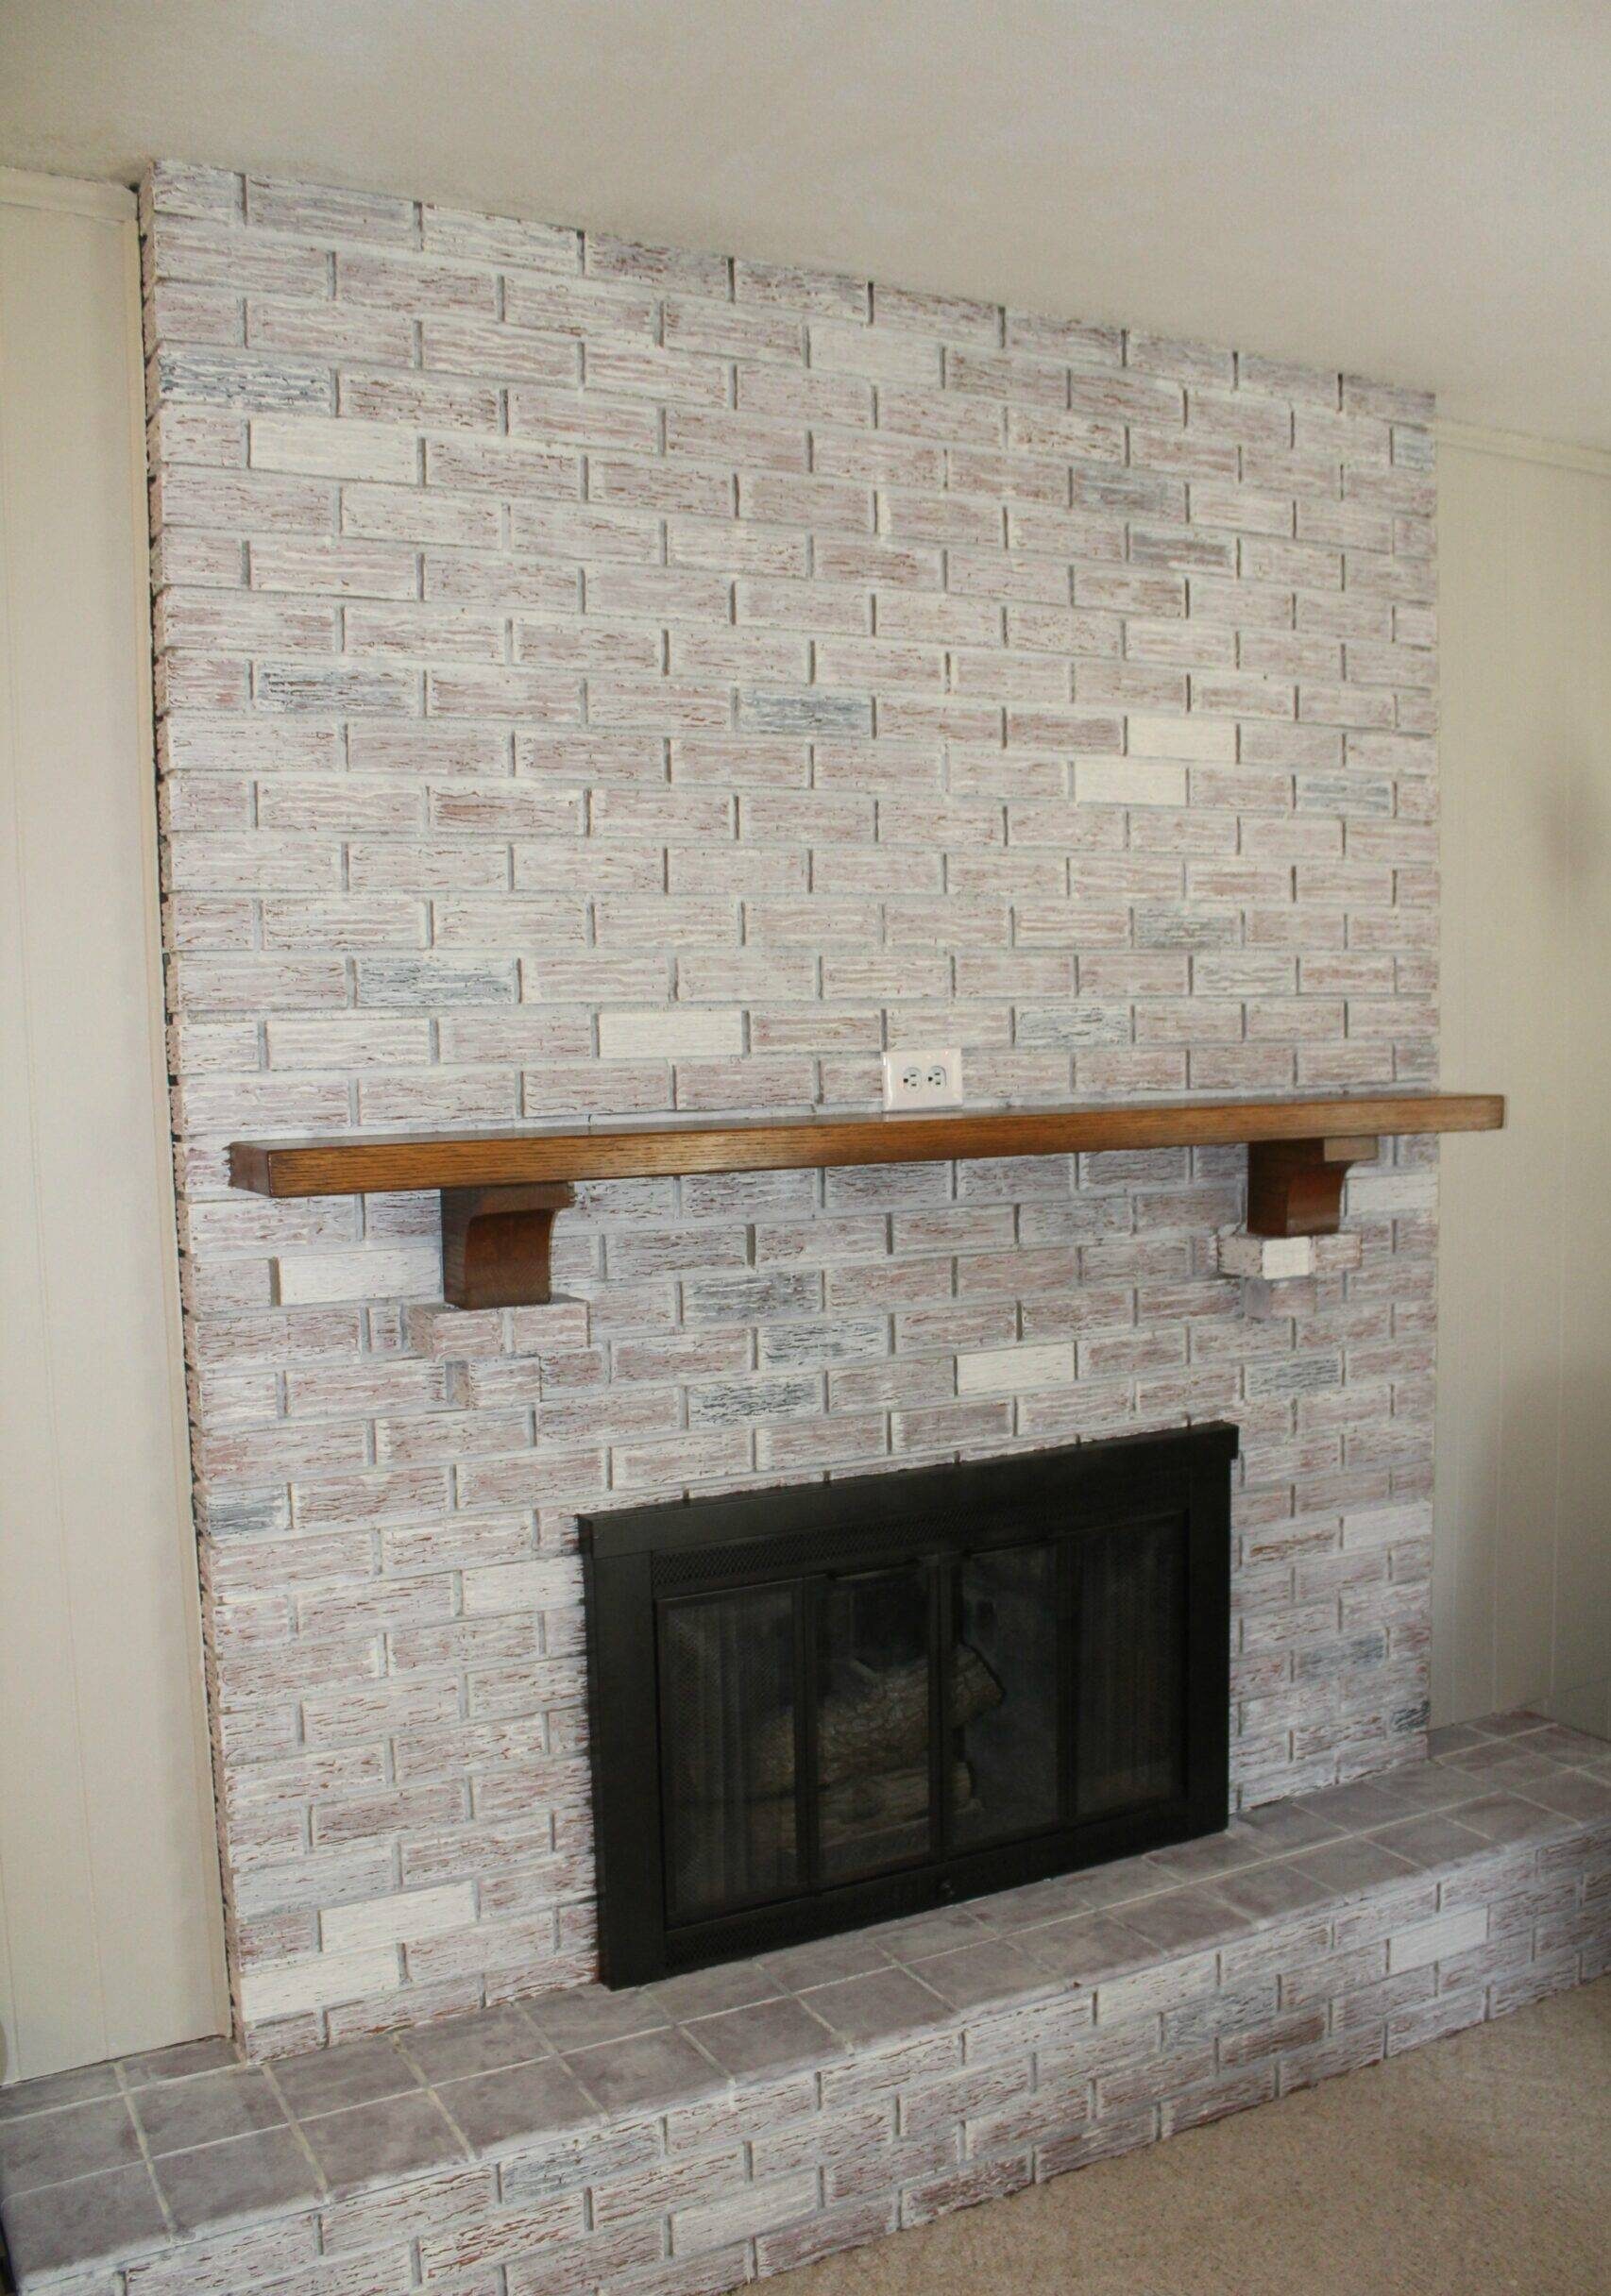 A whitewash fireplace with wooden floating shelve above it.